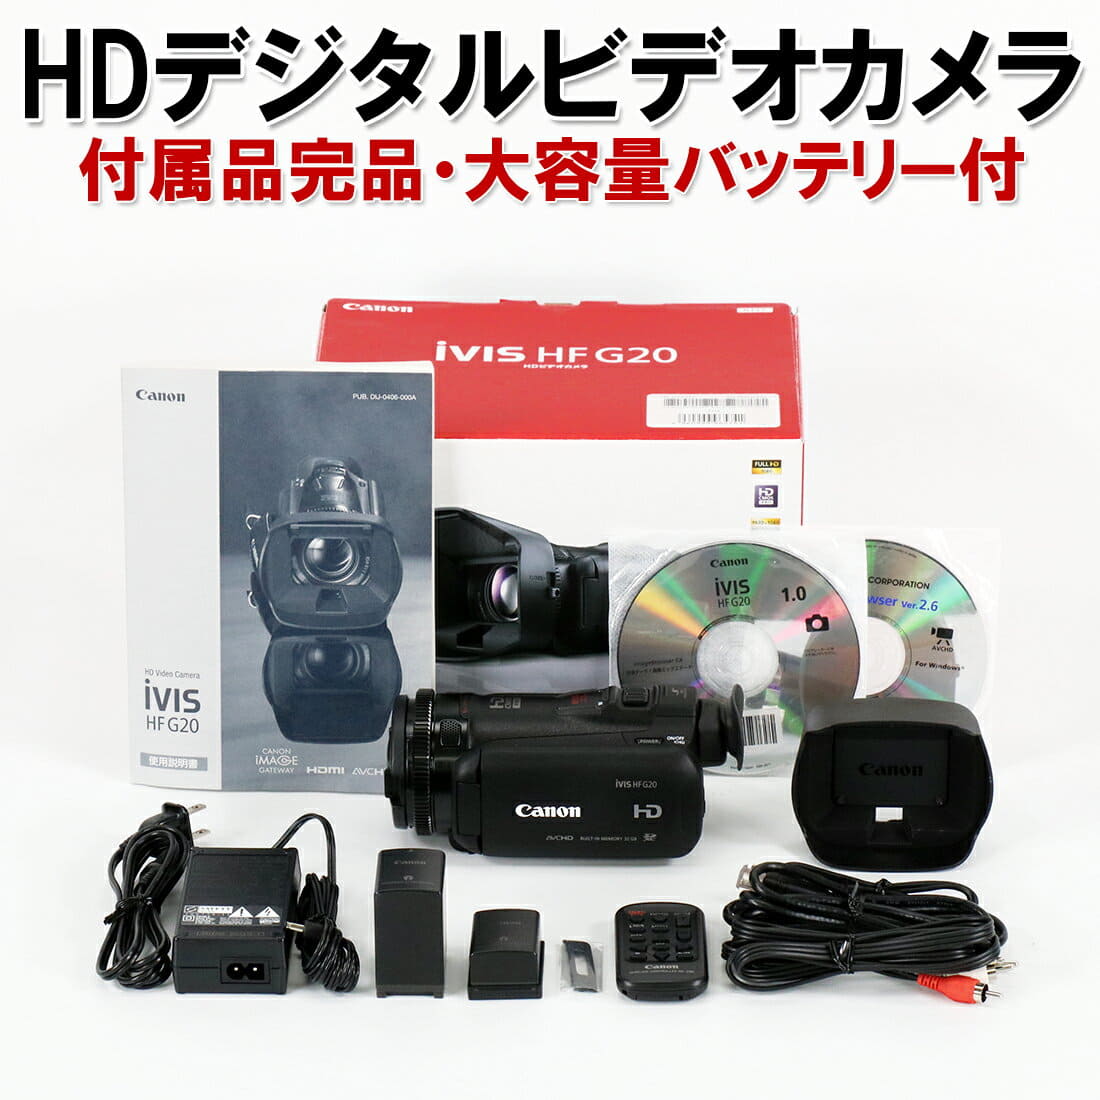 Used]There is for two pieces of hi-vision digital video camera CANON Canon  iVIS HF G20 touch panel operation SD cards insertable memory 32GB  (belonging to a soft case fuzokuhinkanhingaiso clean former box)